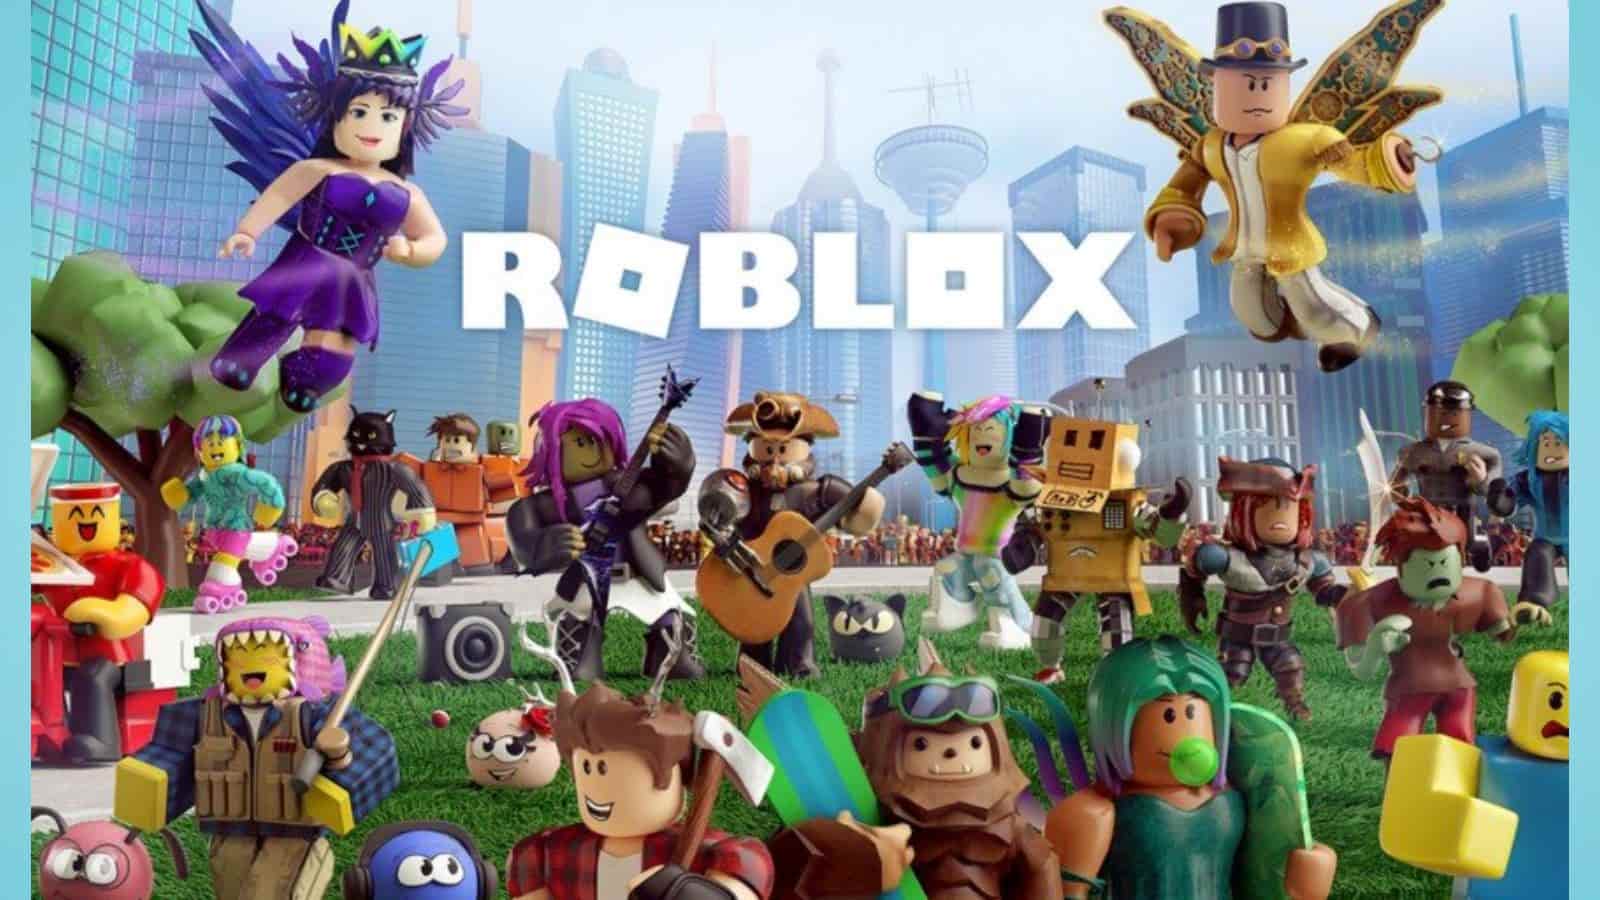 Roblox Game pass, Roblox Down, is Roblox Down, Roblox error, Roblox App Logging Out Problem